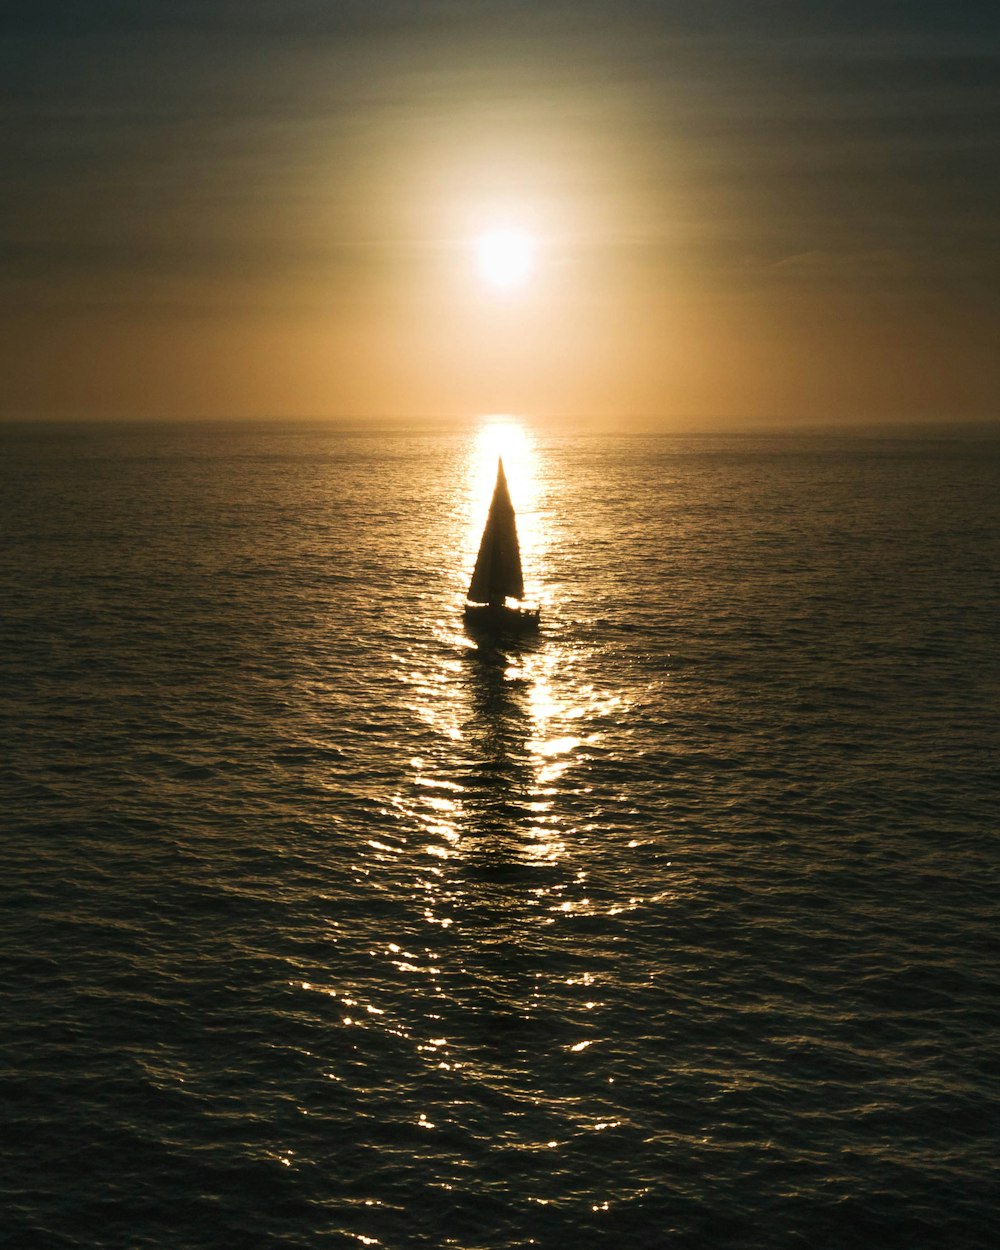 sailboat on calm body of water during golden hour